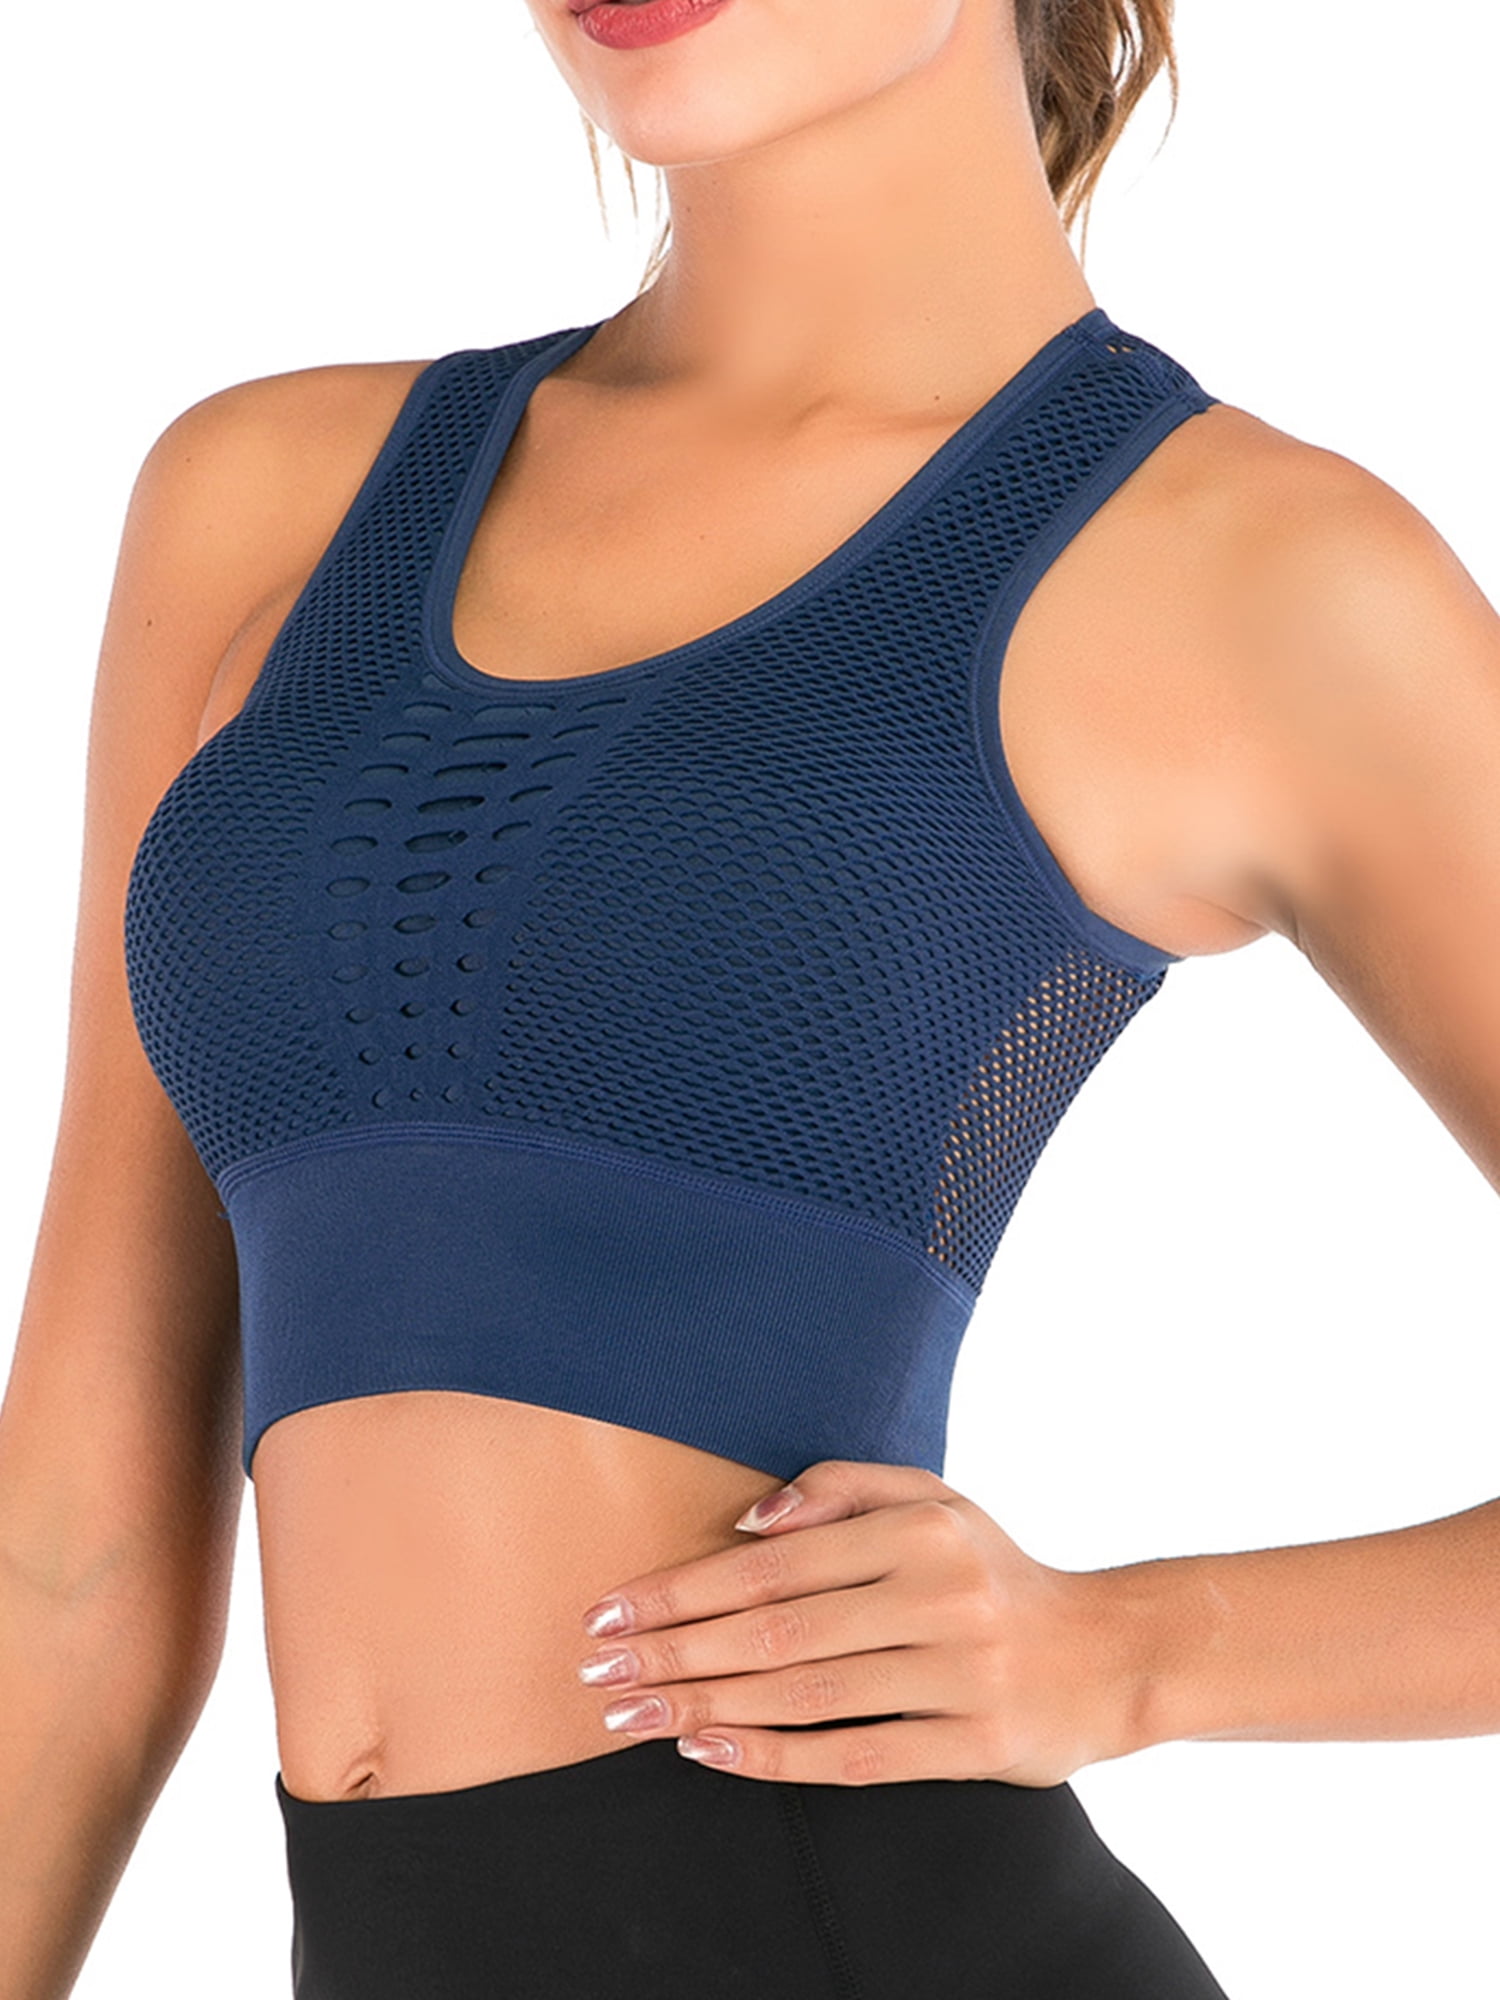 CRZ YOGA High Impact Racerback Sport Bra Support Padded Wirefree Workout  Bra Top